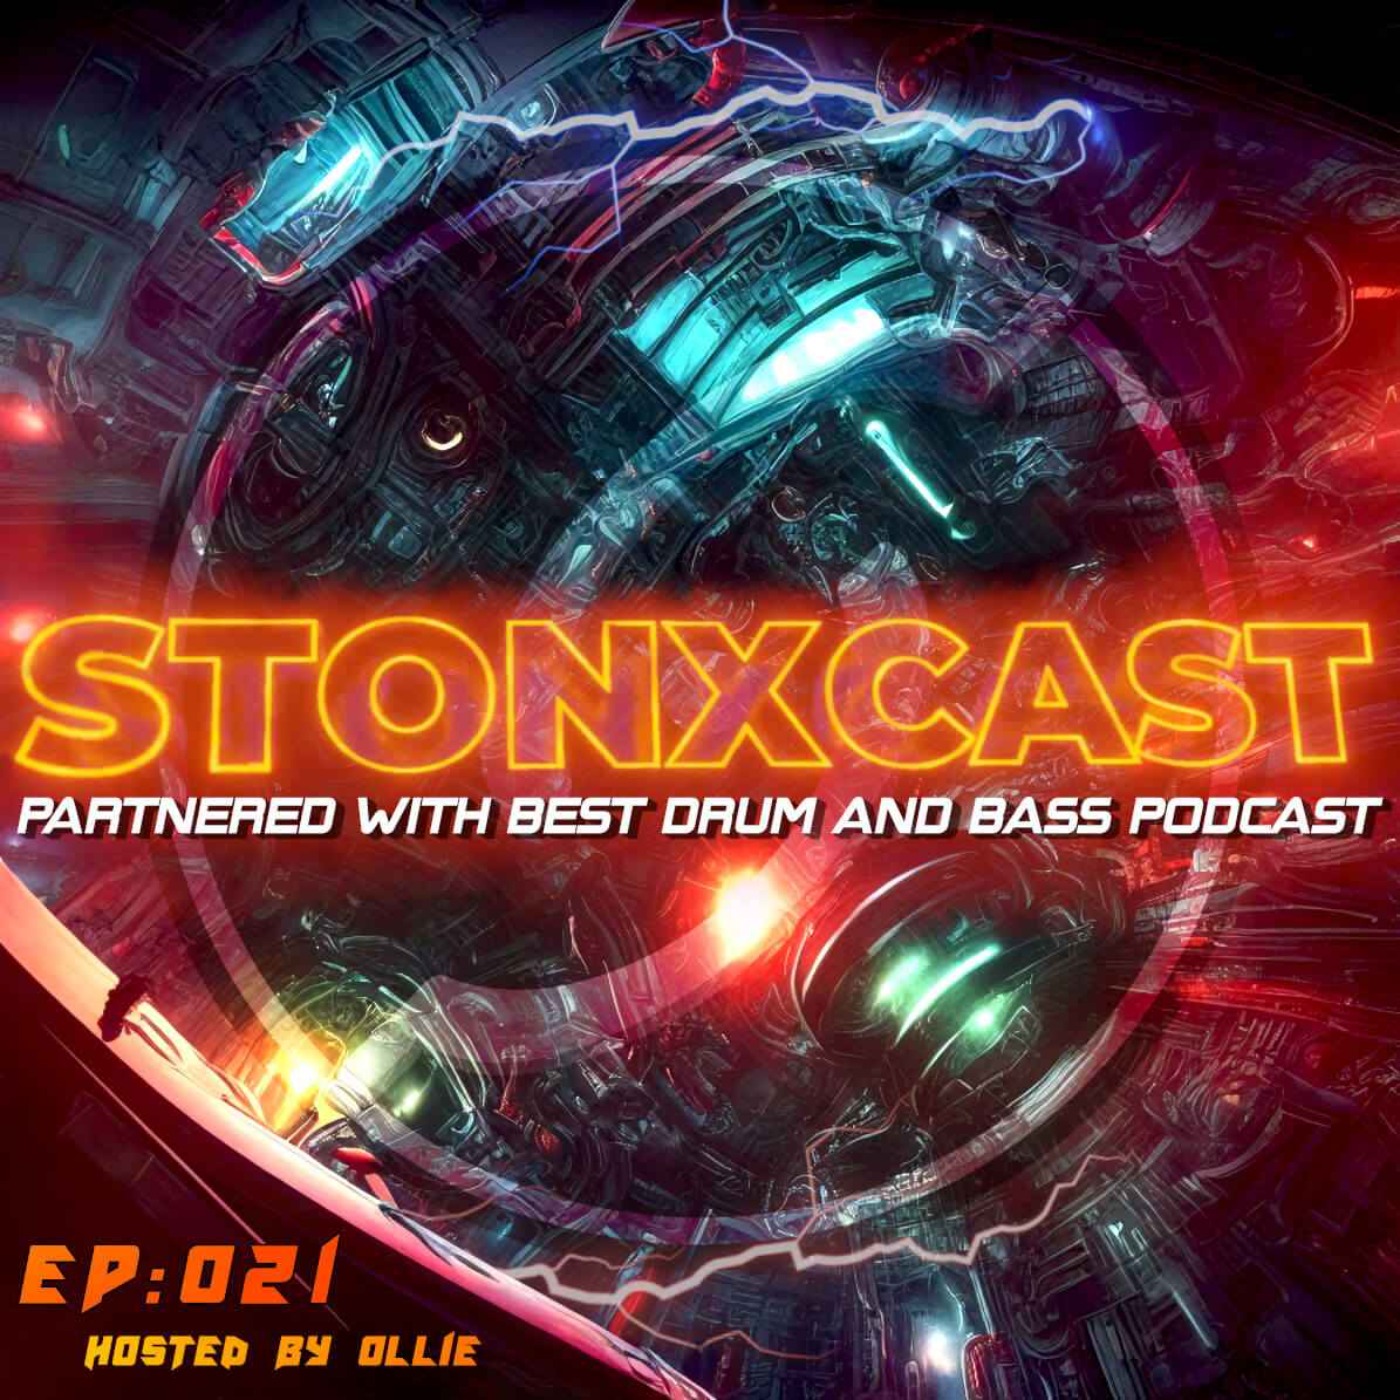 Stonxcast EP:021 - Hosted by Ollie Artwork